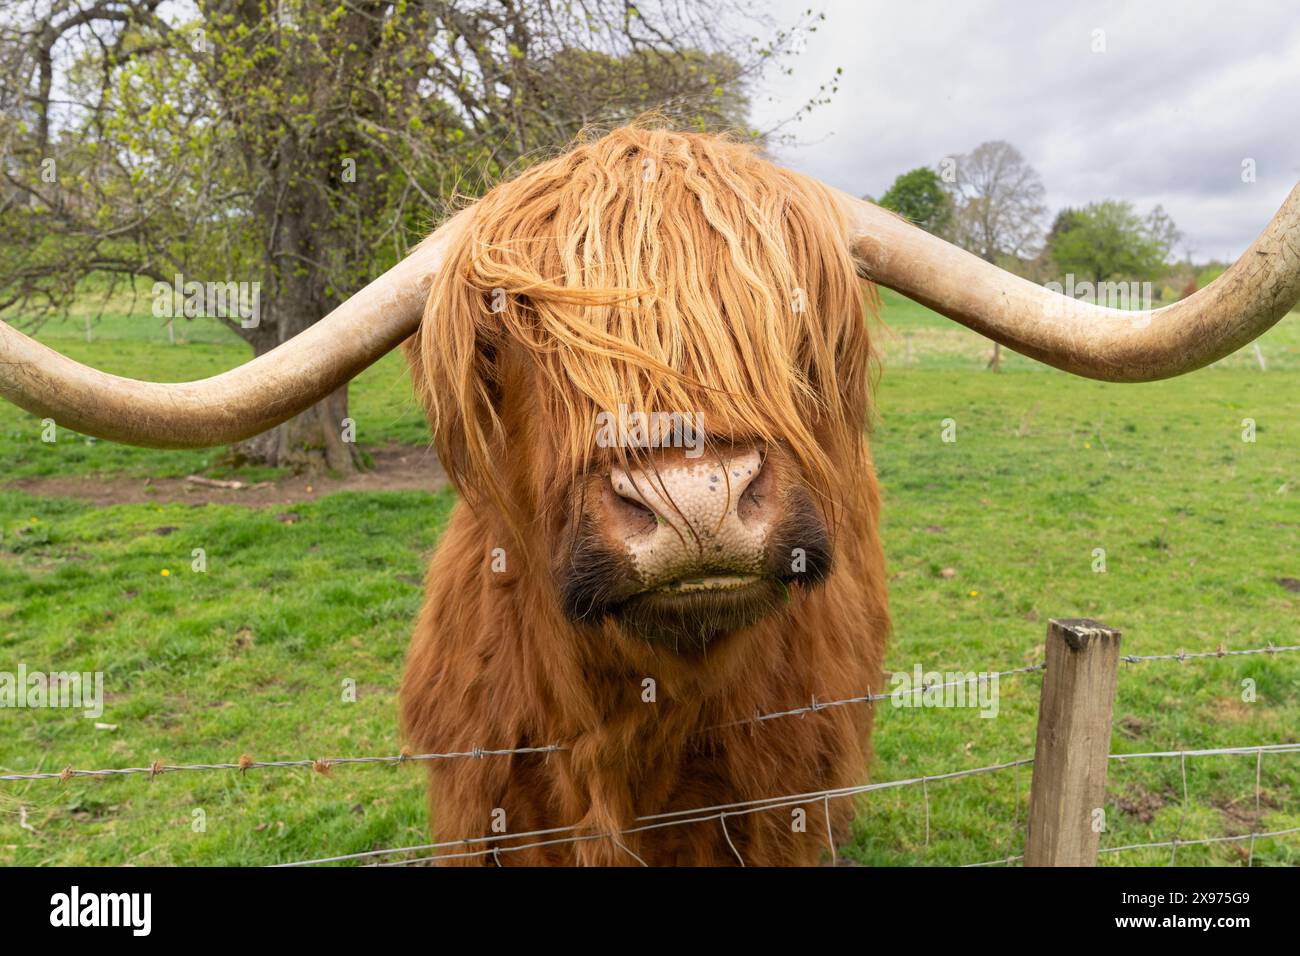 Close up of a Scottish Highland Cow with his hair covering his eyes Stock Photo